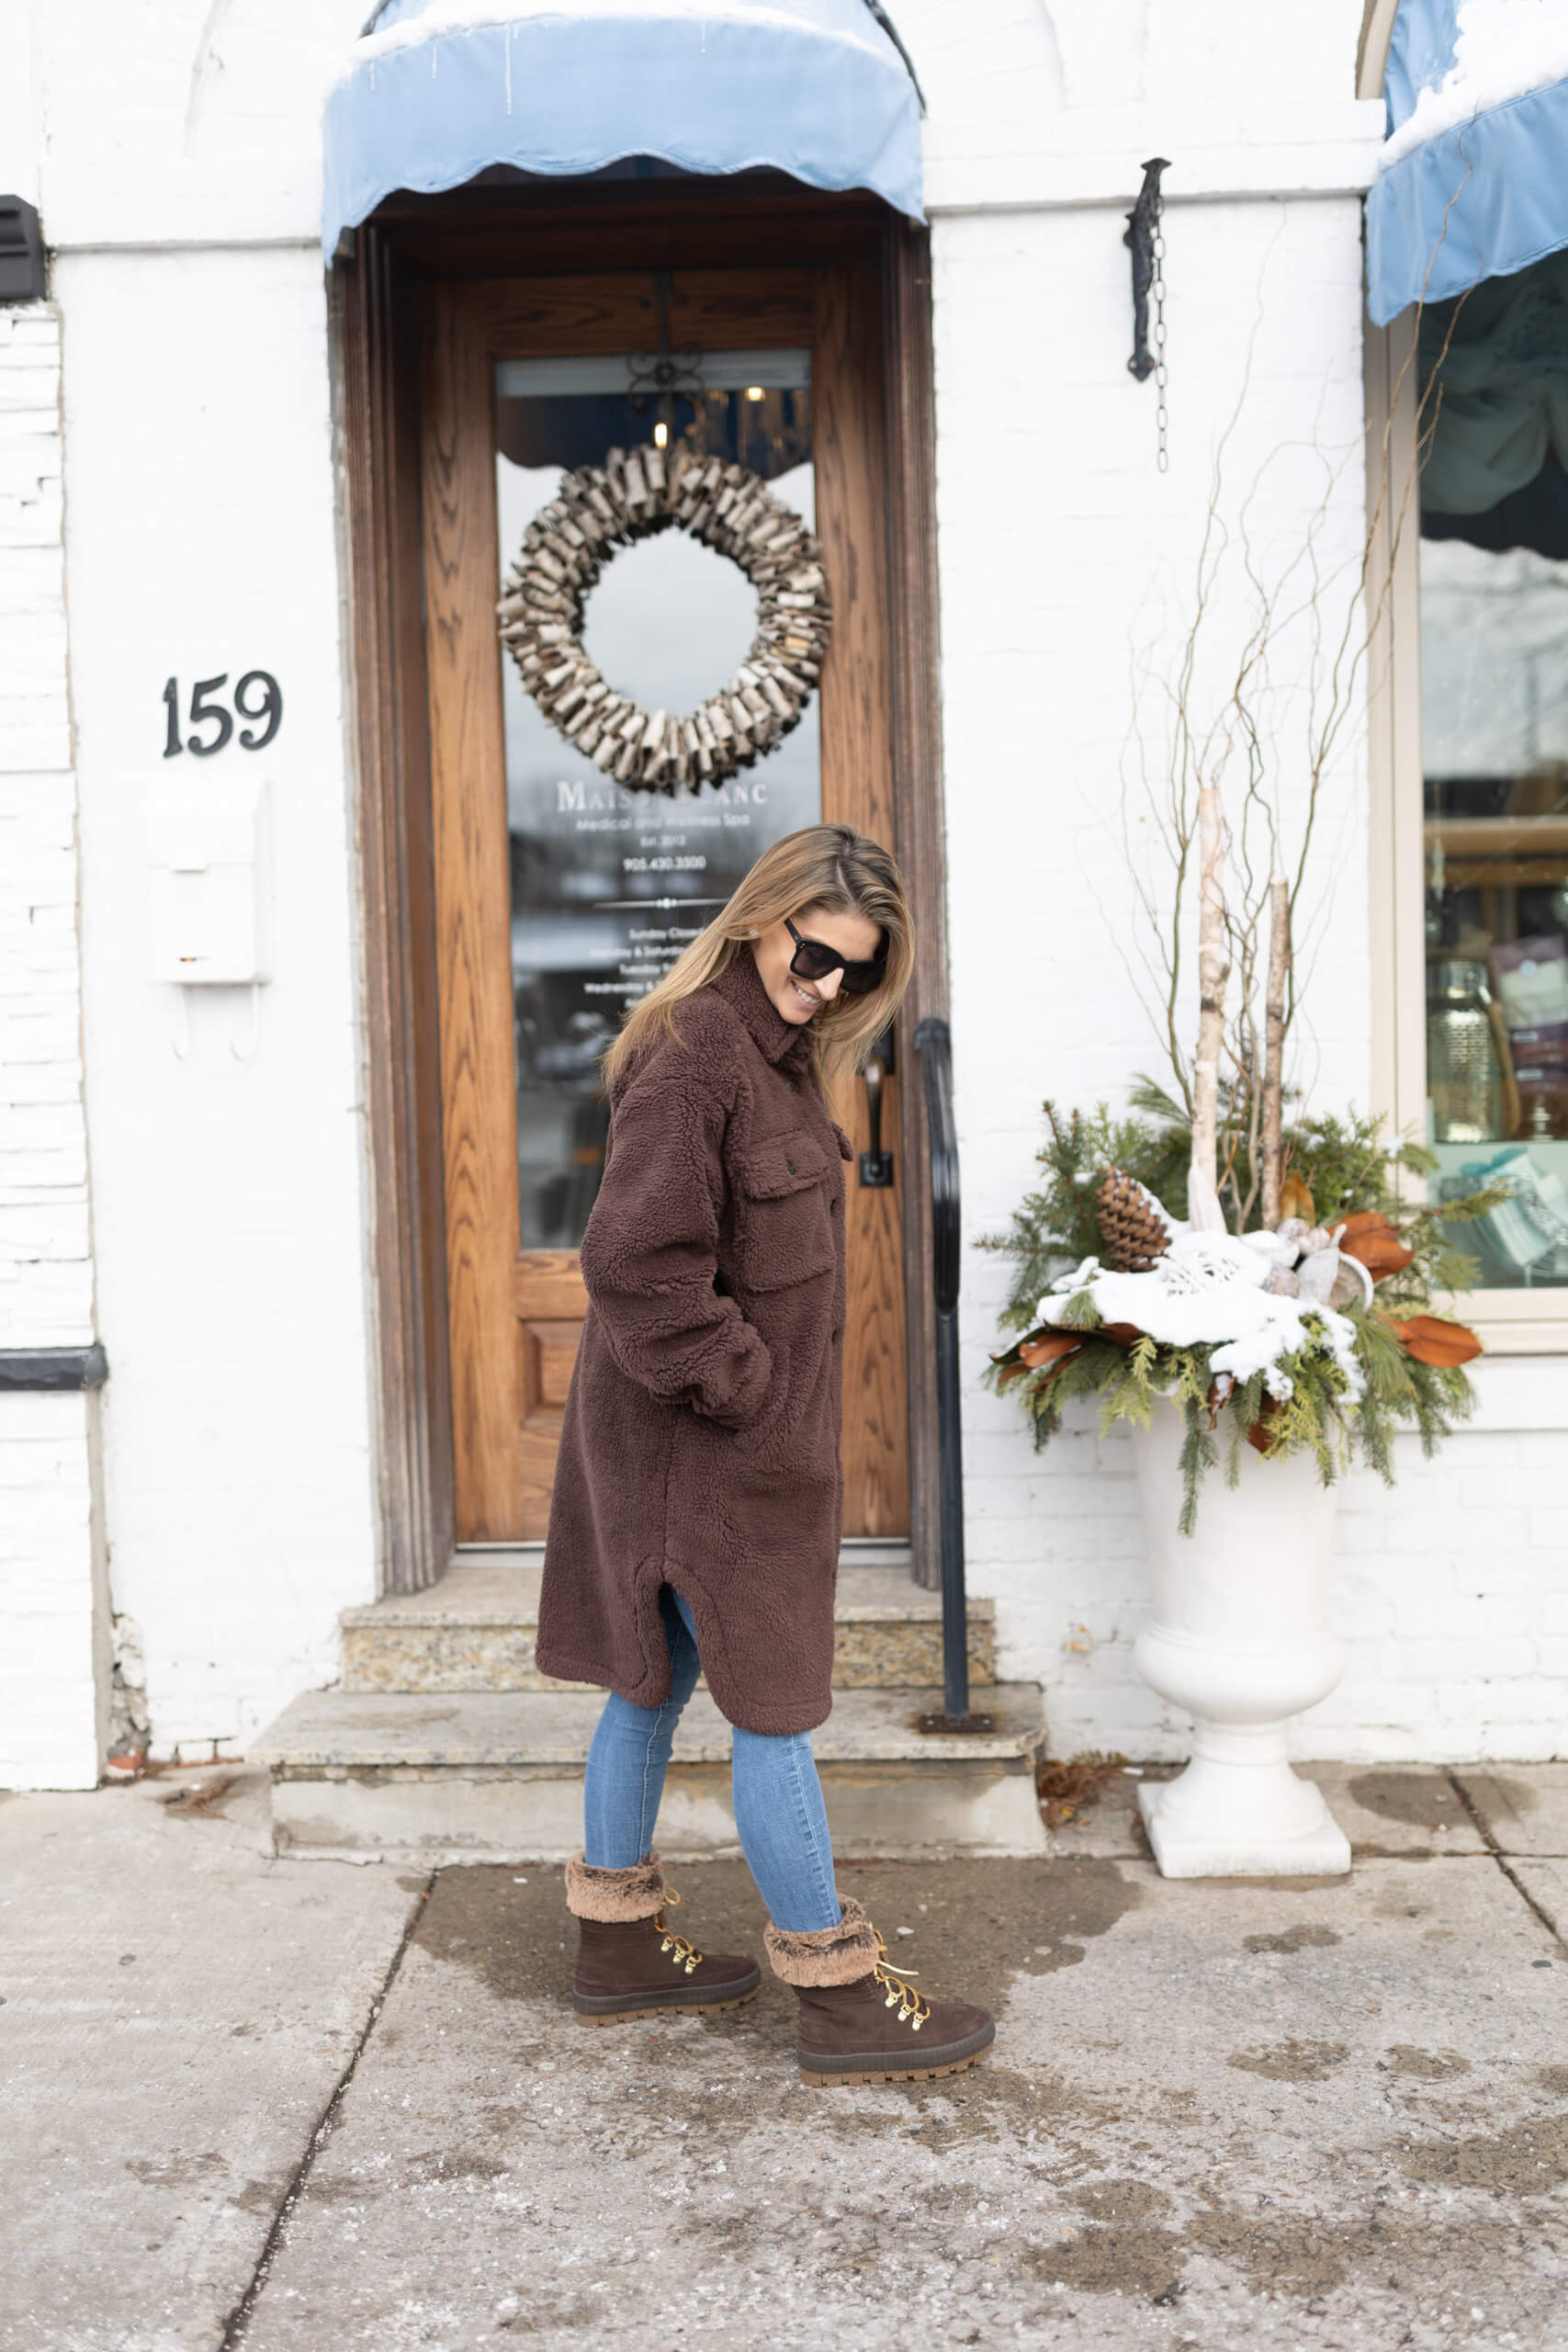 Sperry Torrent Lave up Boot; gap teddy bear coat; sparkleshinylove mandy furnis 